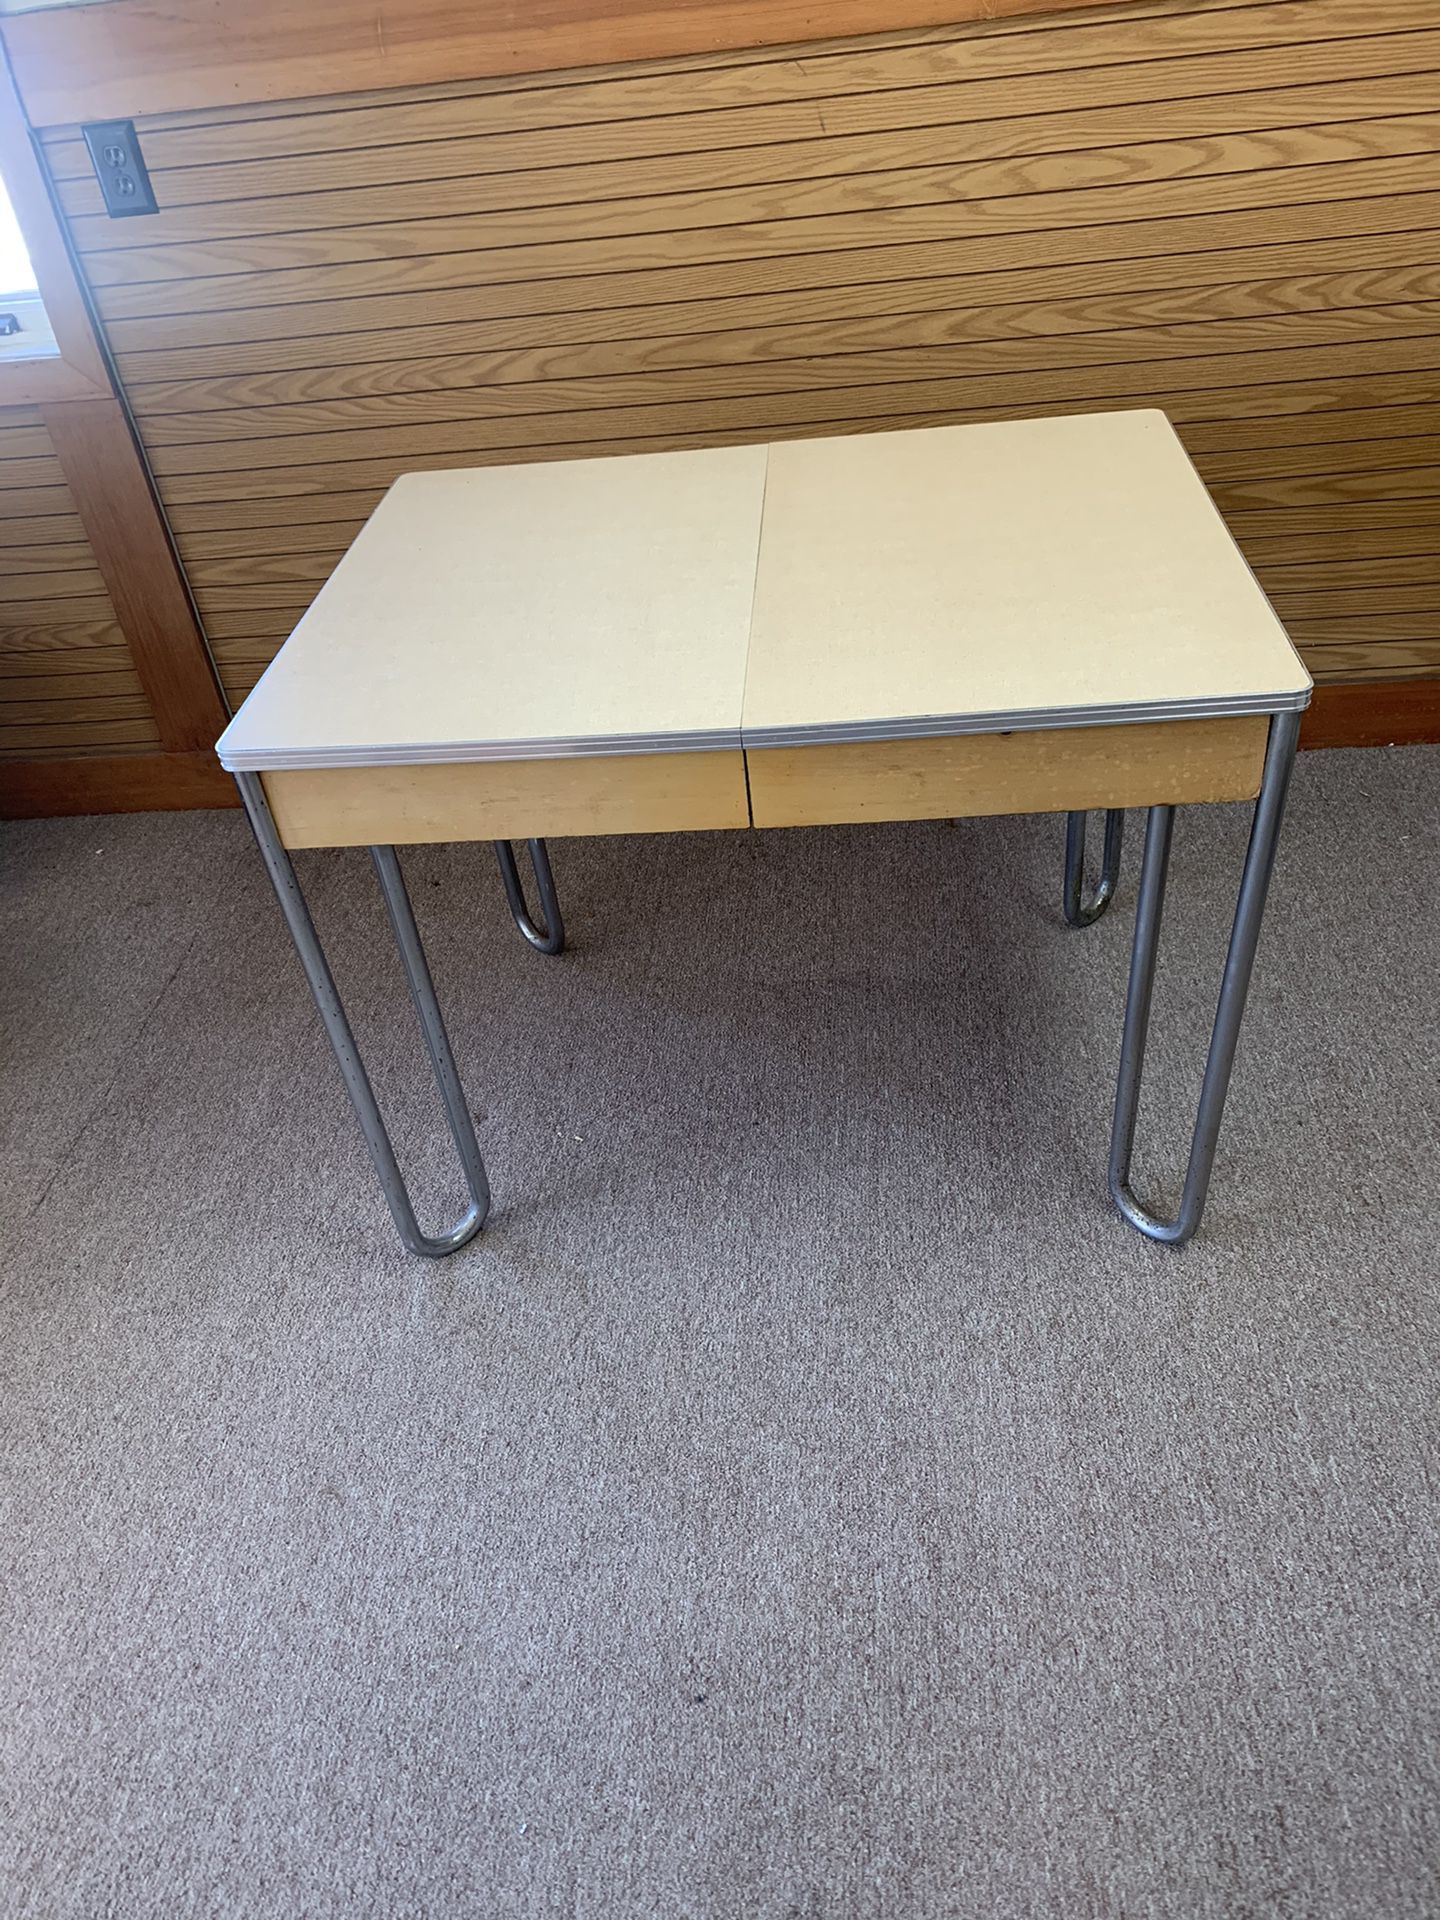 Formica top table